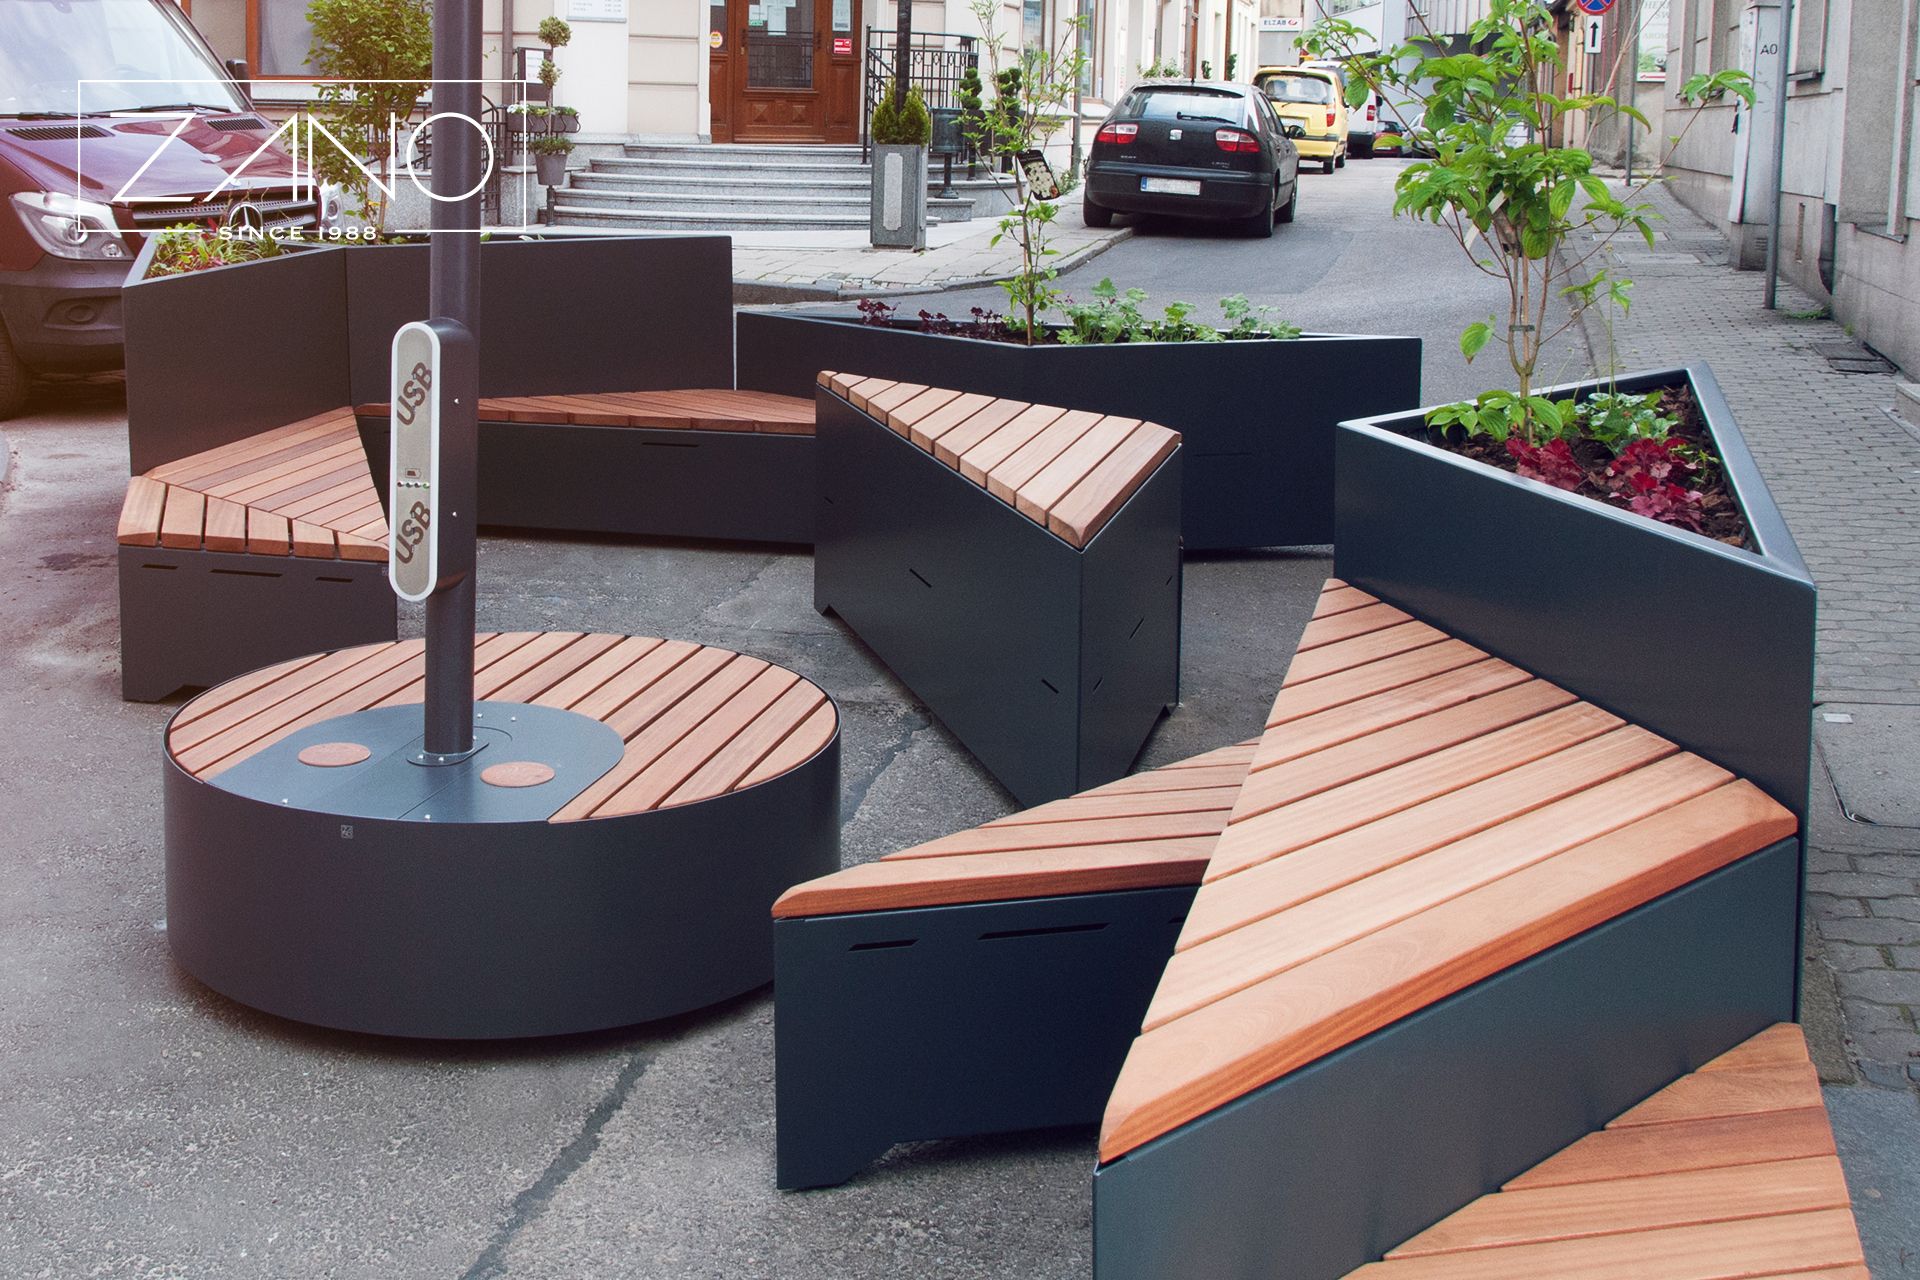 Origami - street benches and planters